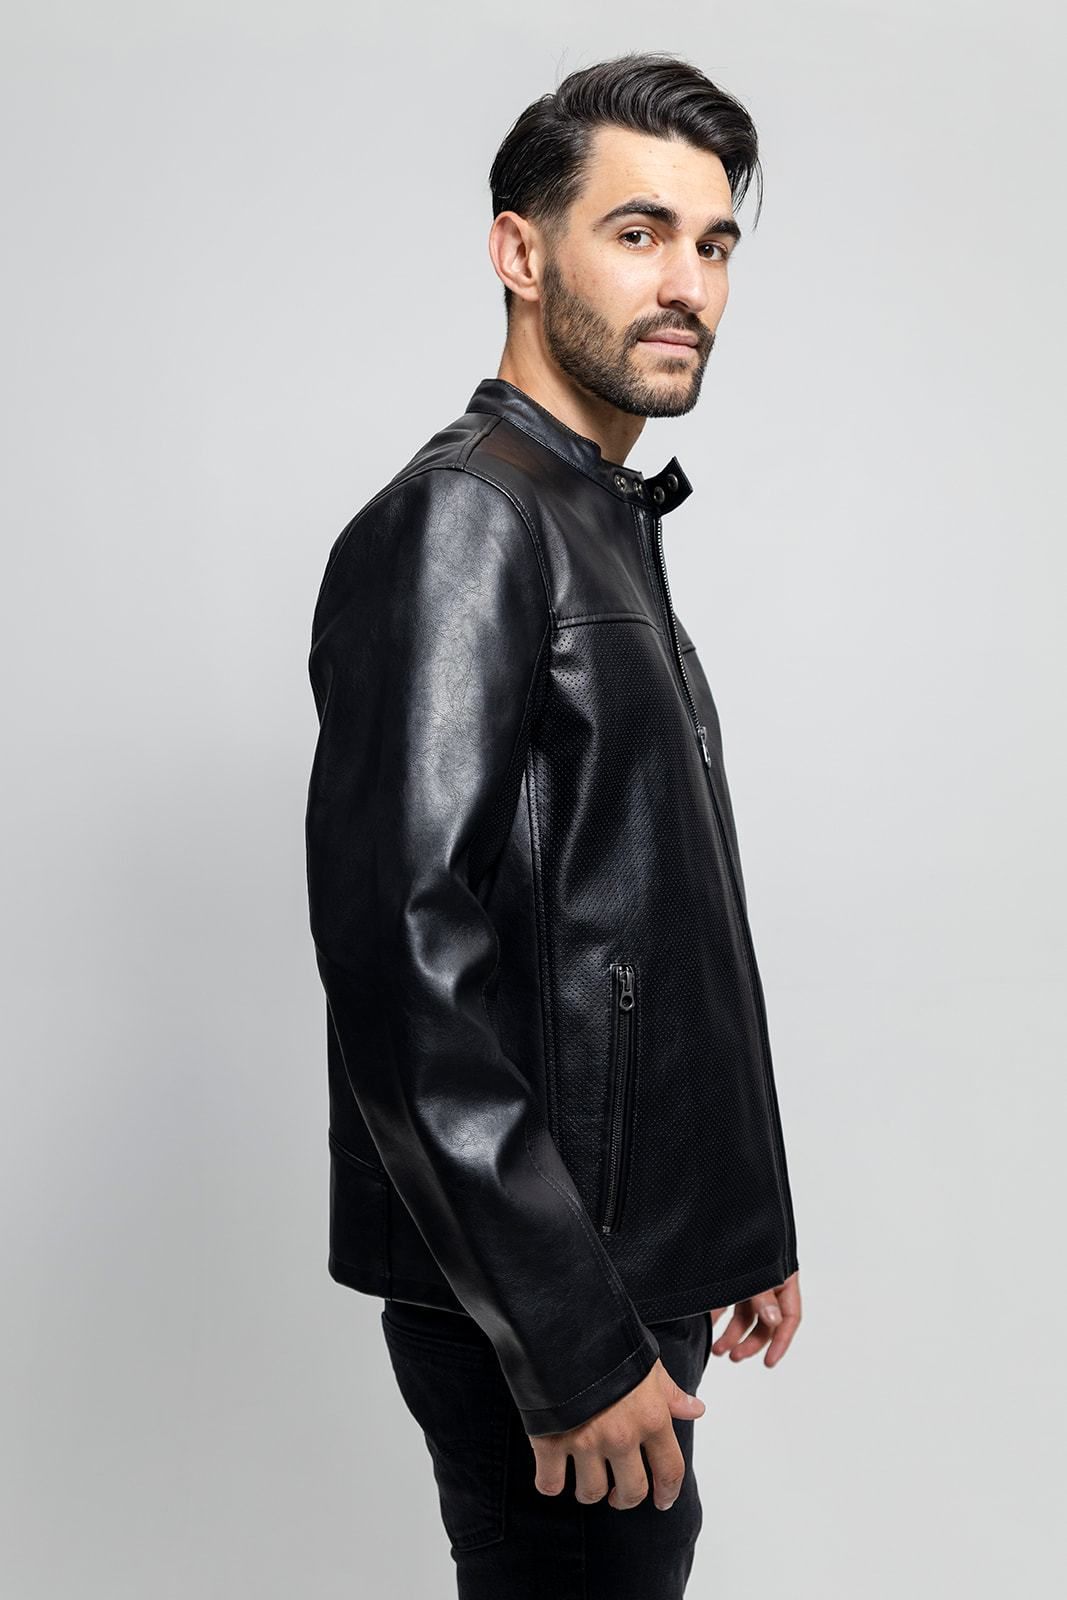 Finest Leather Jackets New York